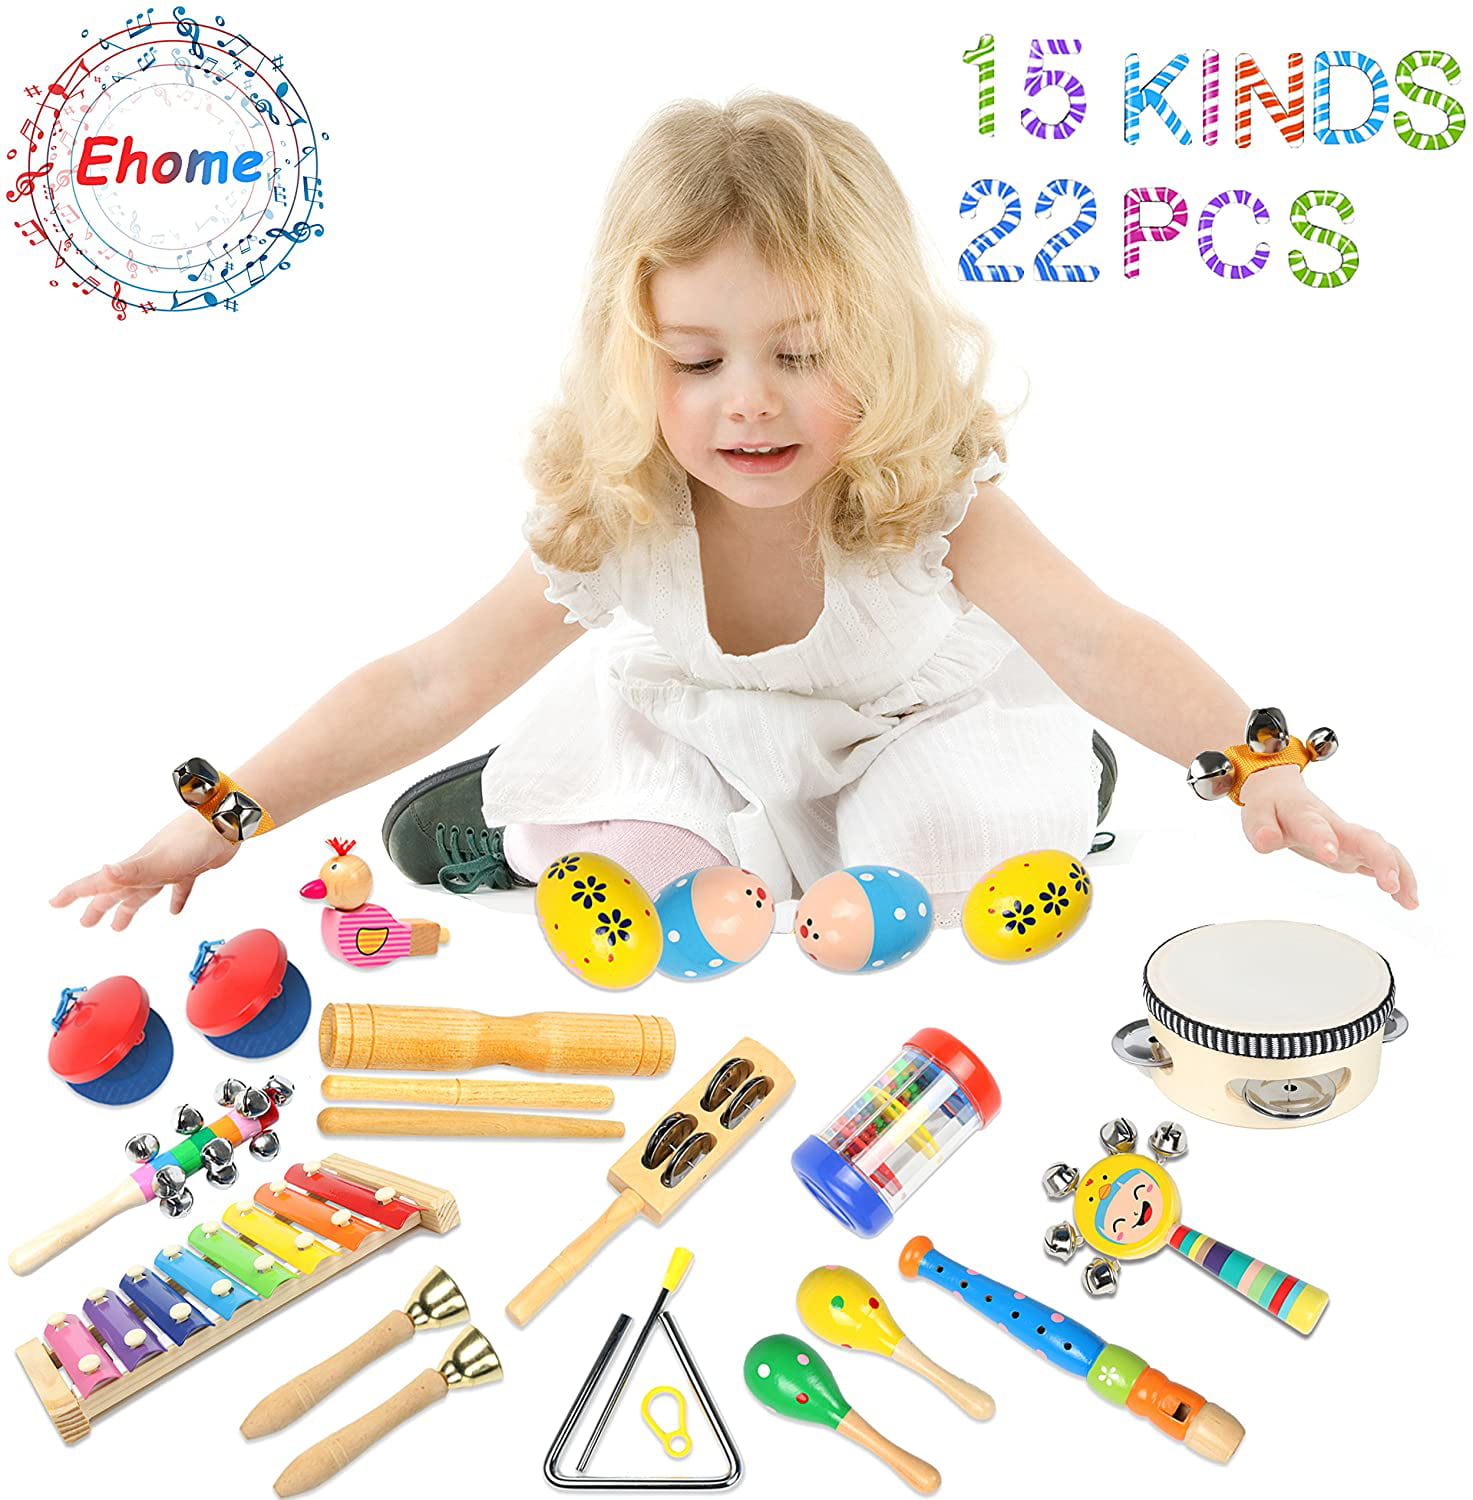 Toddler Musical Instruments-15 Types 22pcs Wooden Toddler Musical Percussion Instruments Toy Set for Kids Preschool Educational Early Learning Musical Toys Set for Boys and Girls